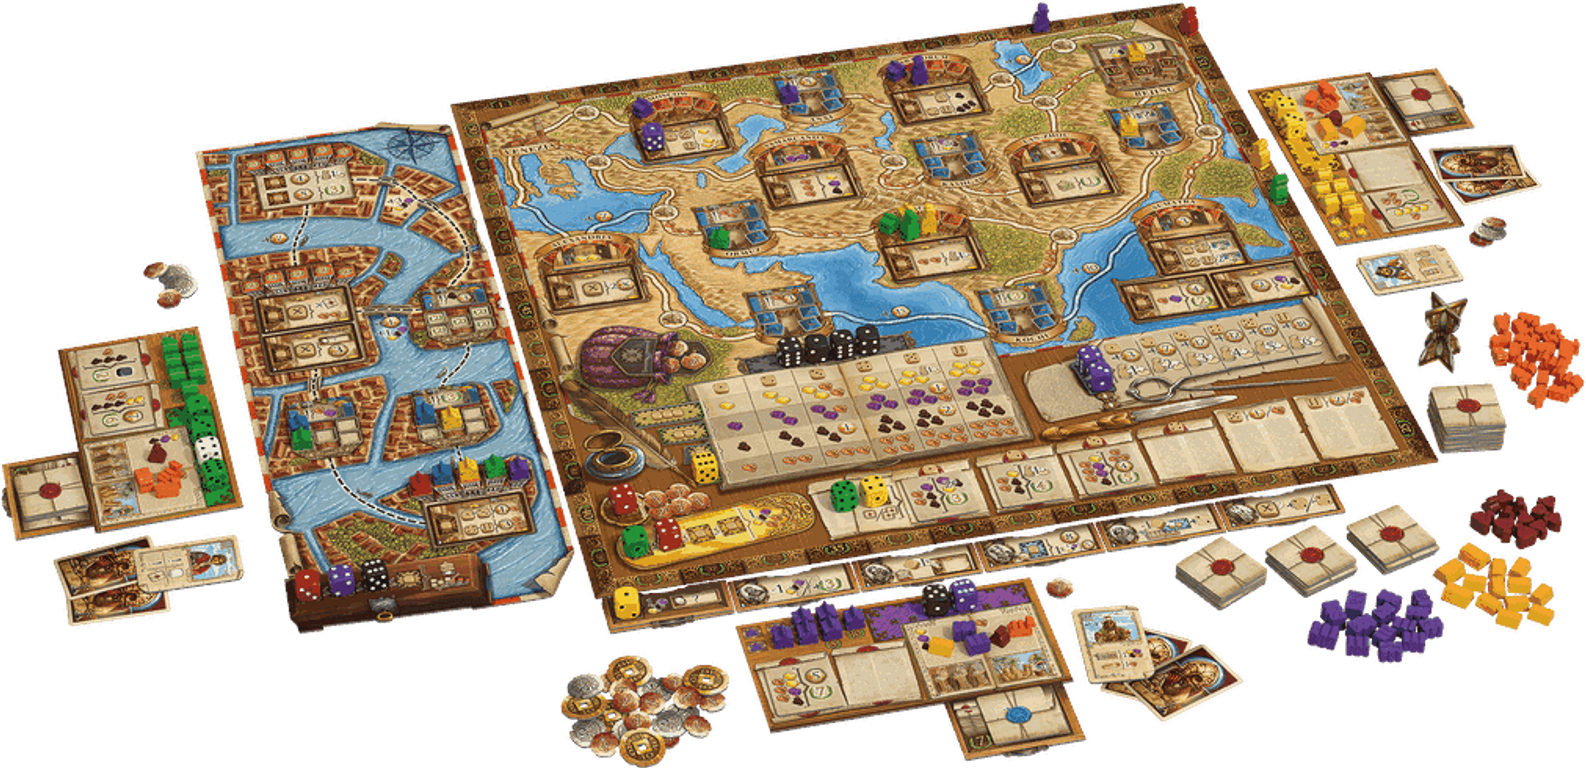 The Voyages of Marco Polo: Agents of Venice gameplay